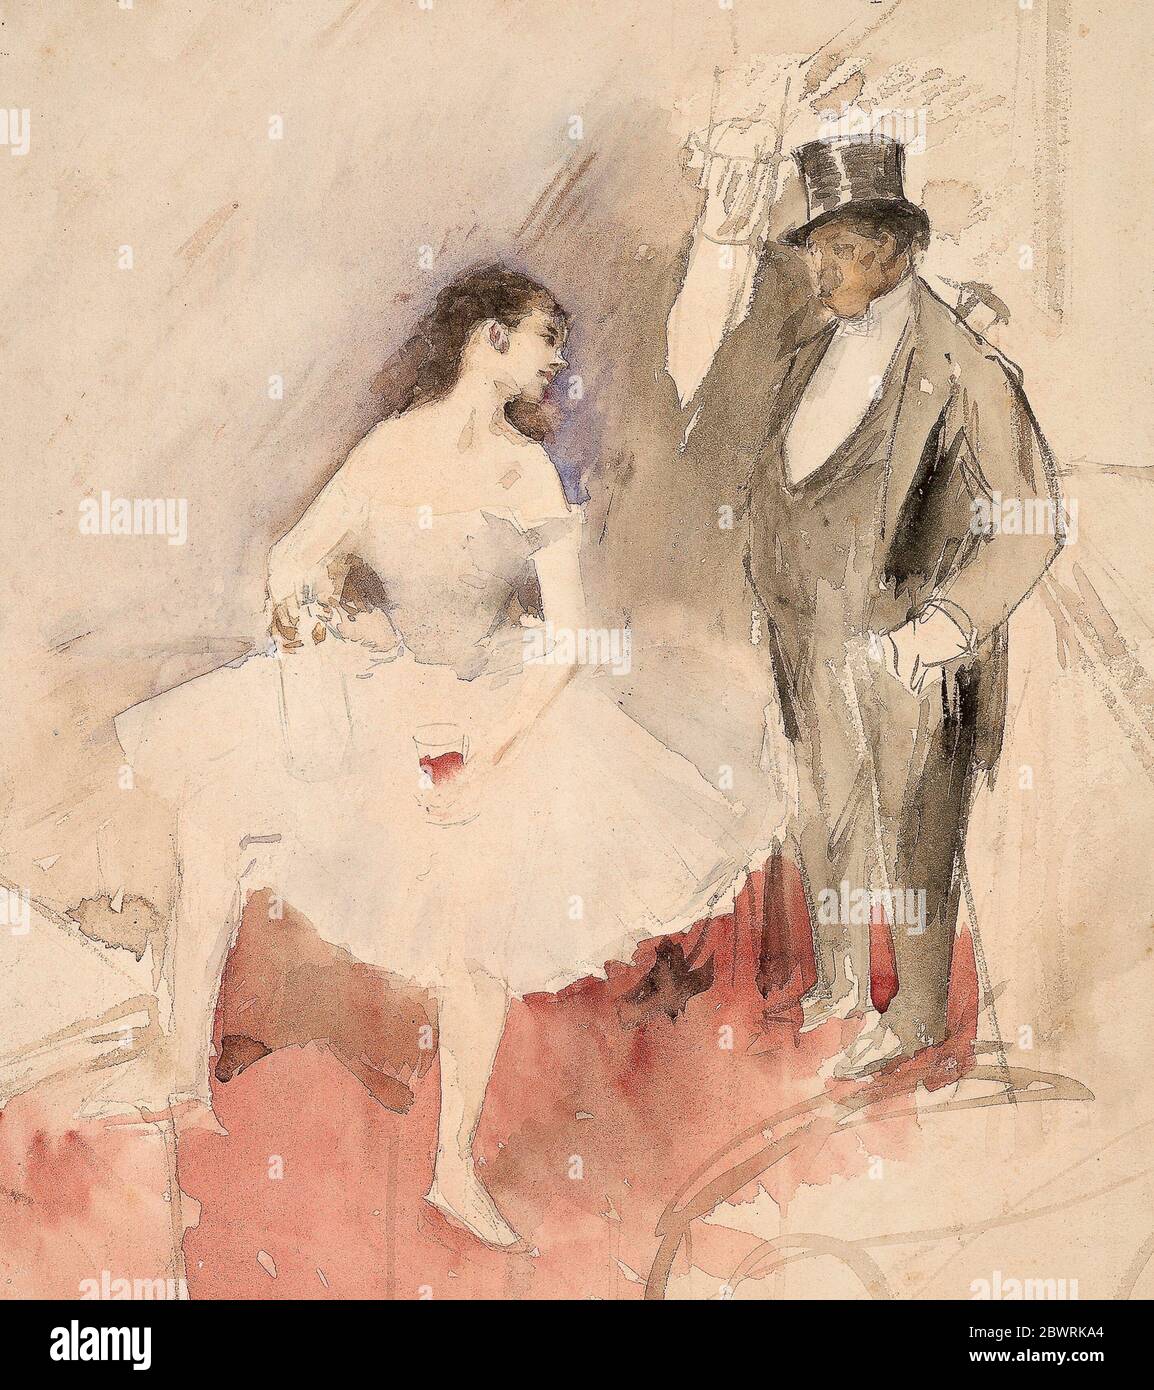 Author: Jean Louis Forain. Dancer and Man - Jean Louis Forain French,  1852-1931. Watercolor, over traces of charcoal, on cream wove paper.  1872'1925 Stock Photo - Alamy